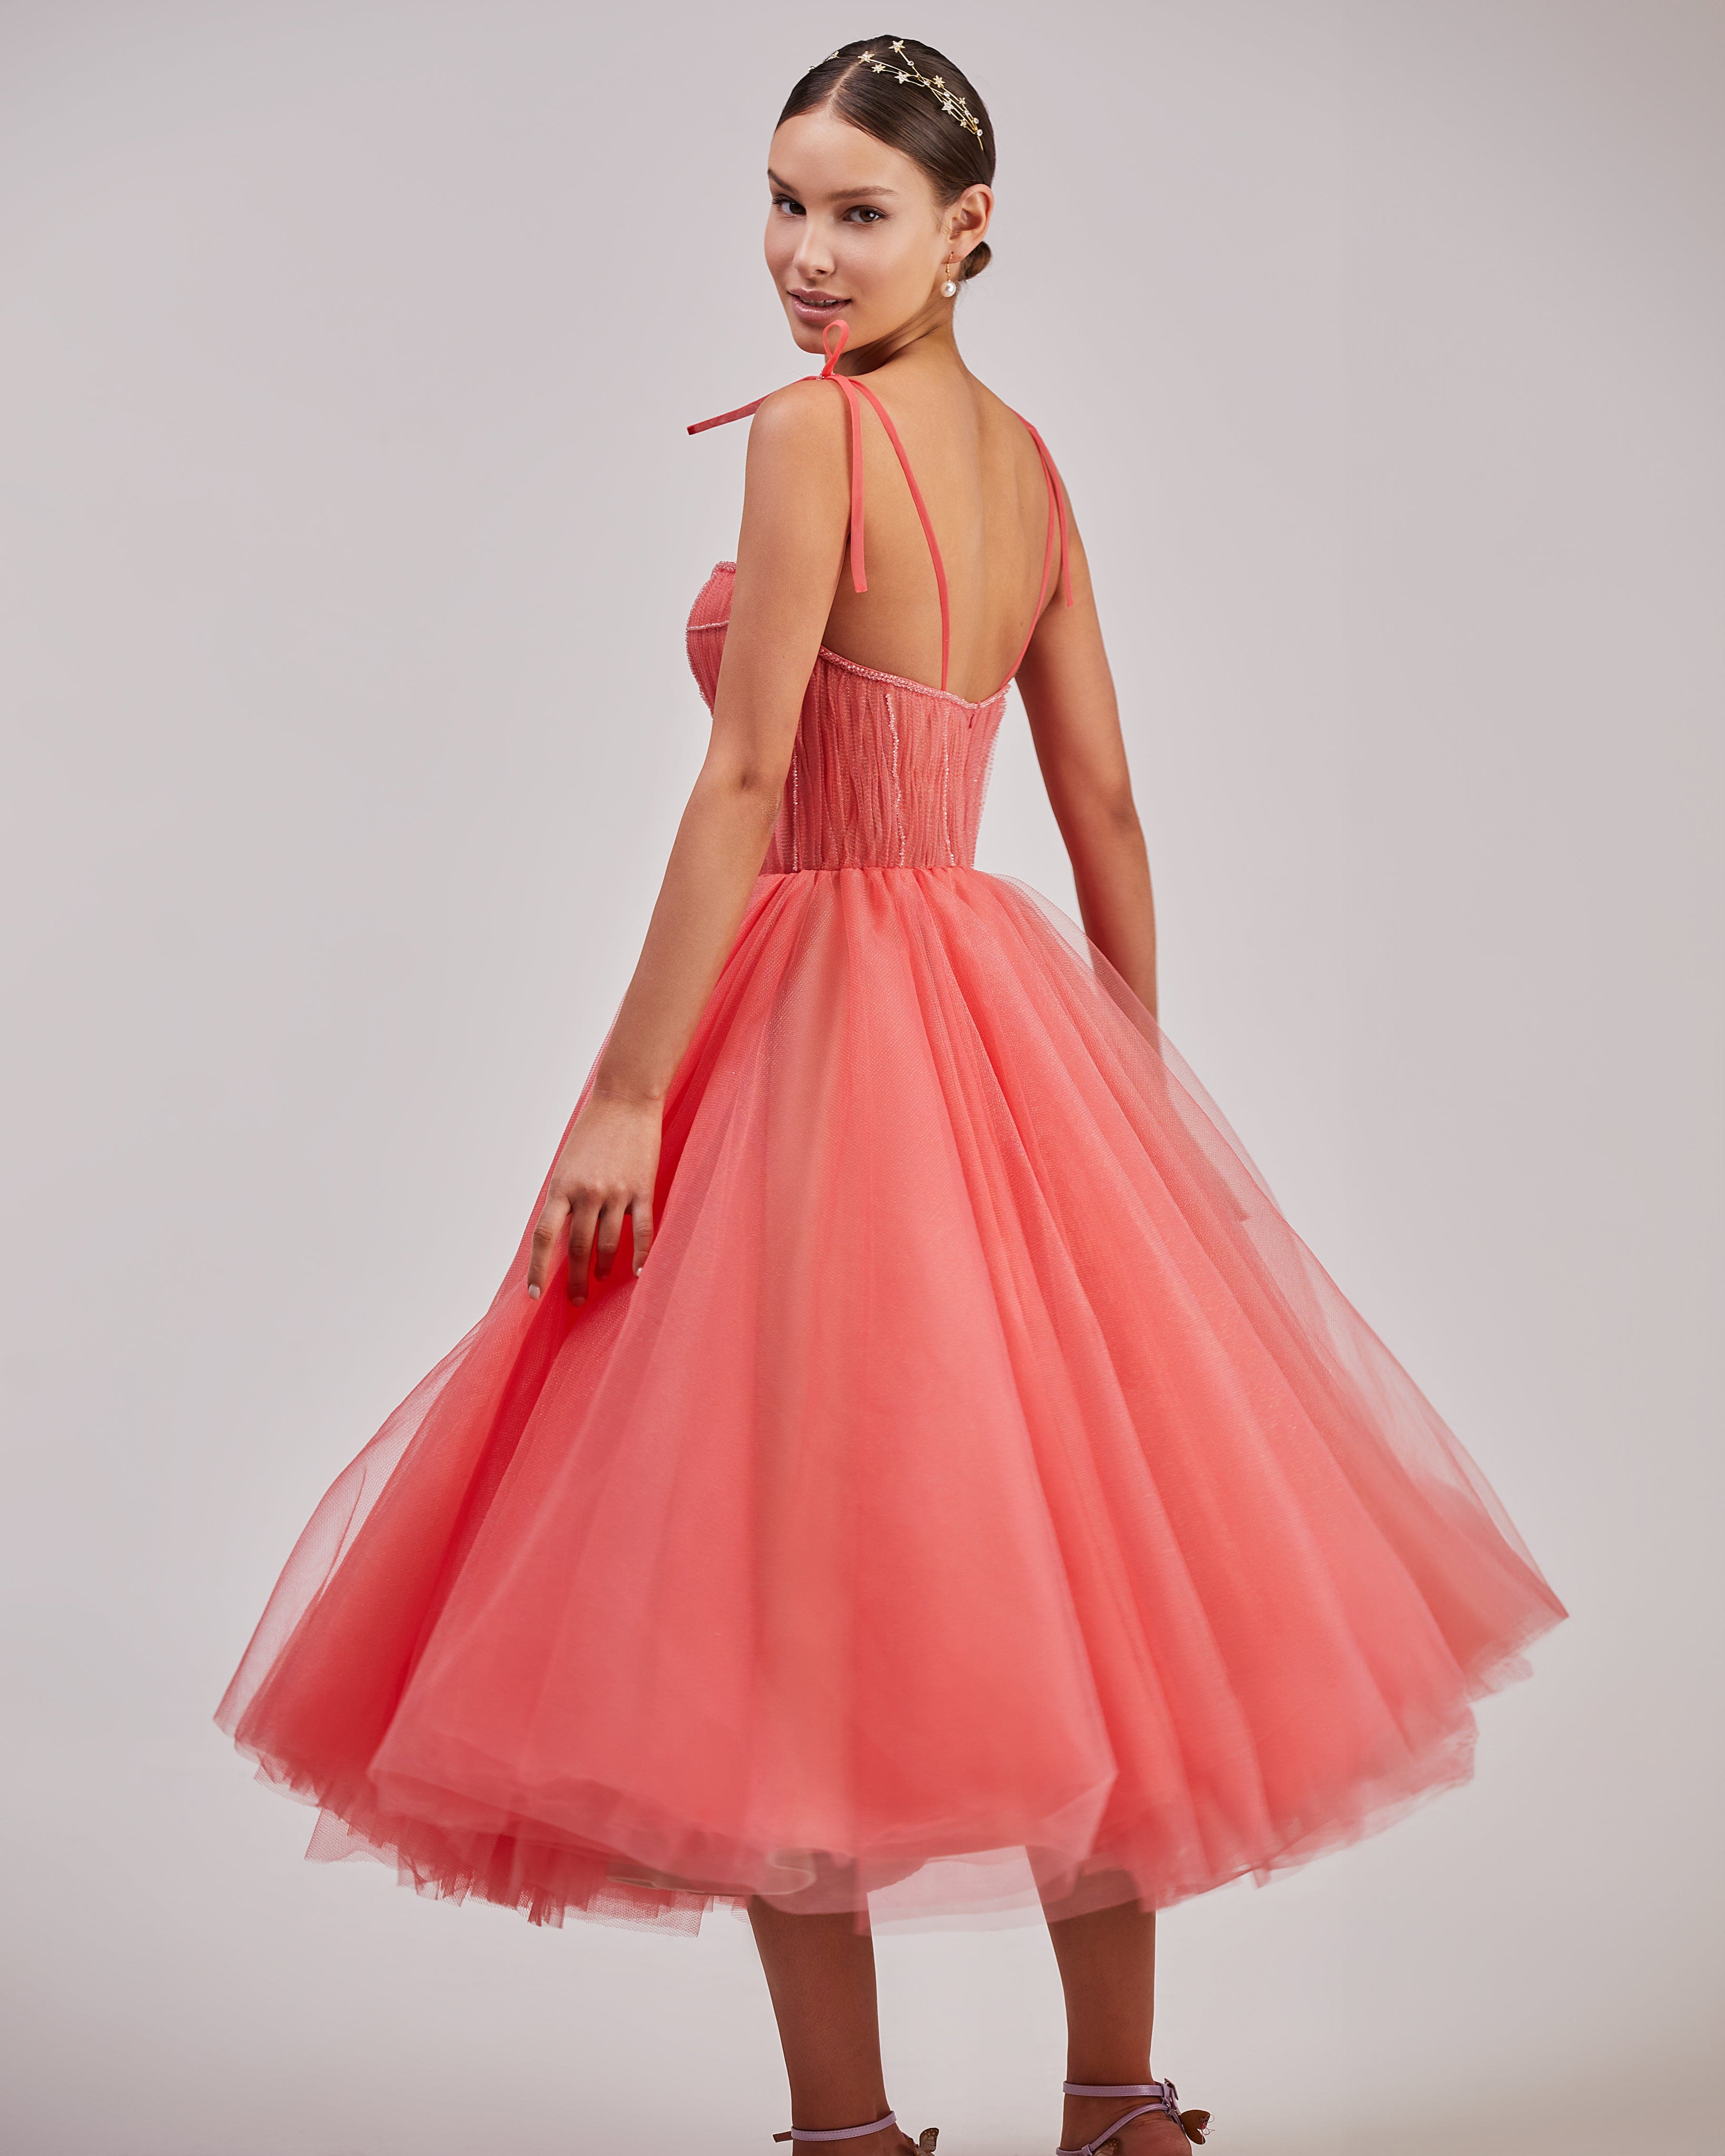 Coral Tie-strap cocktail dress with the elegant corset embroidery